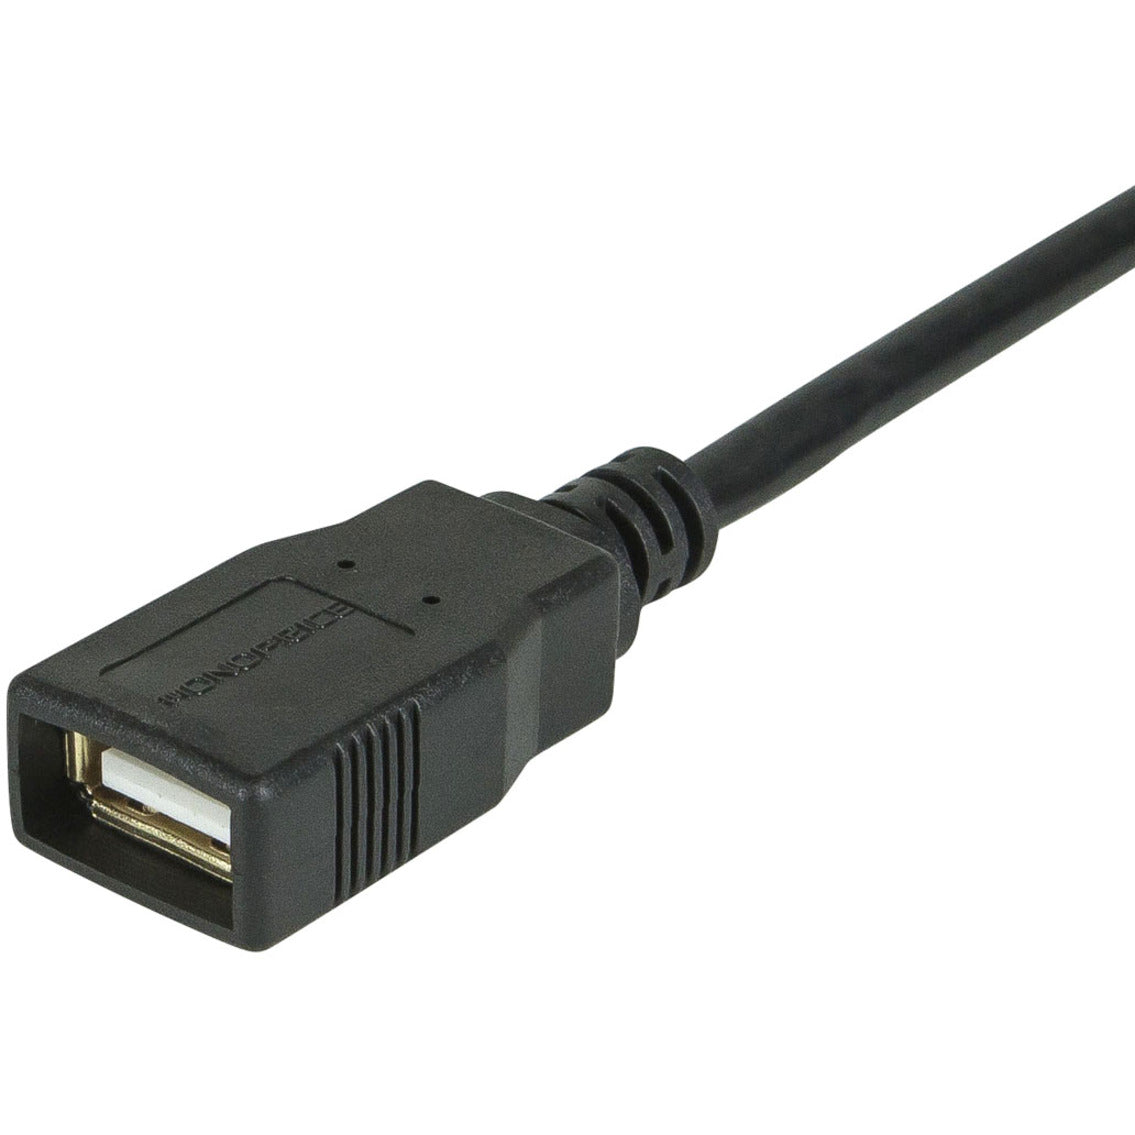 Monoprice 5433 6ft USB 2.0 A Male to A Female Extension Cable, Corrosion-Free, Gold Plated